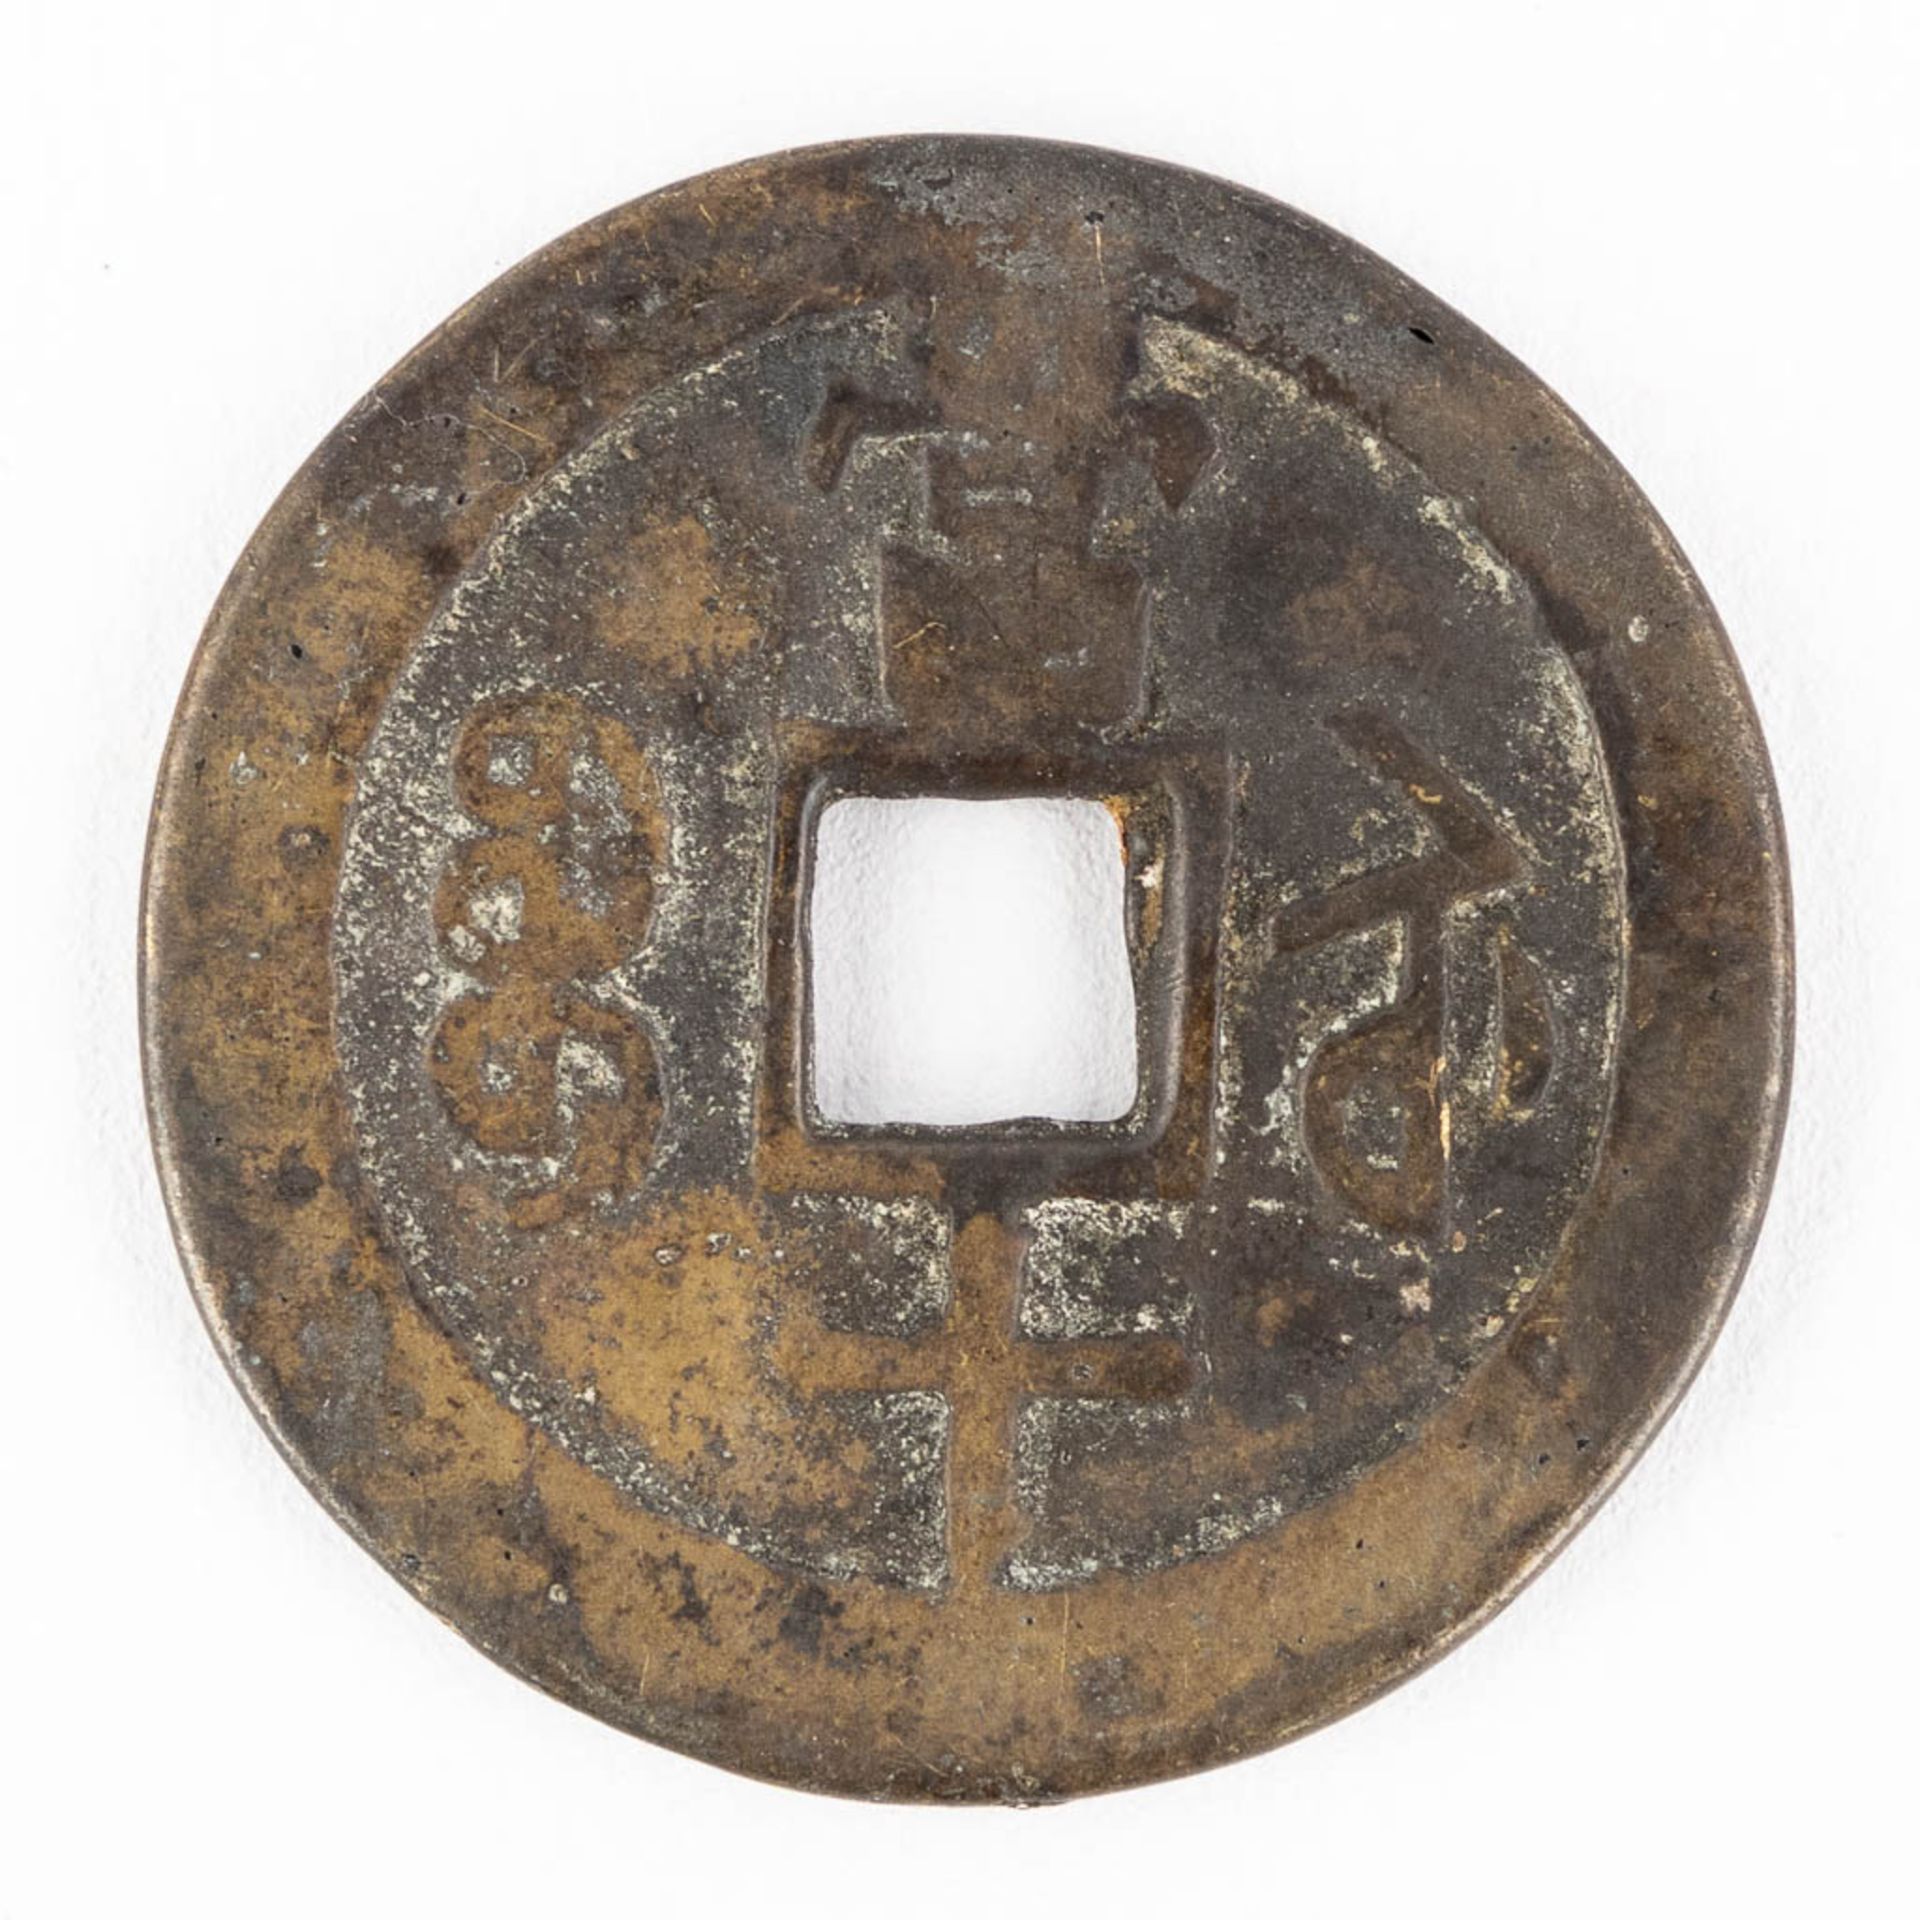 A Chinese insence burner, vase and a lucky coin. Bronze. (H:19 x D:5 cm) - Image 19 of 19